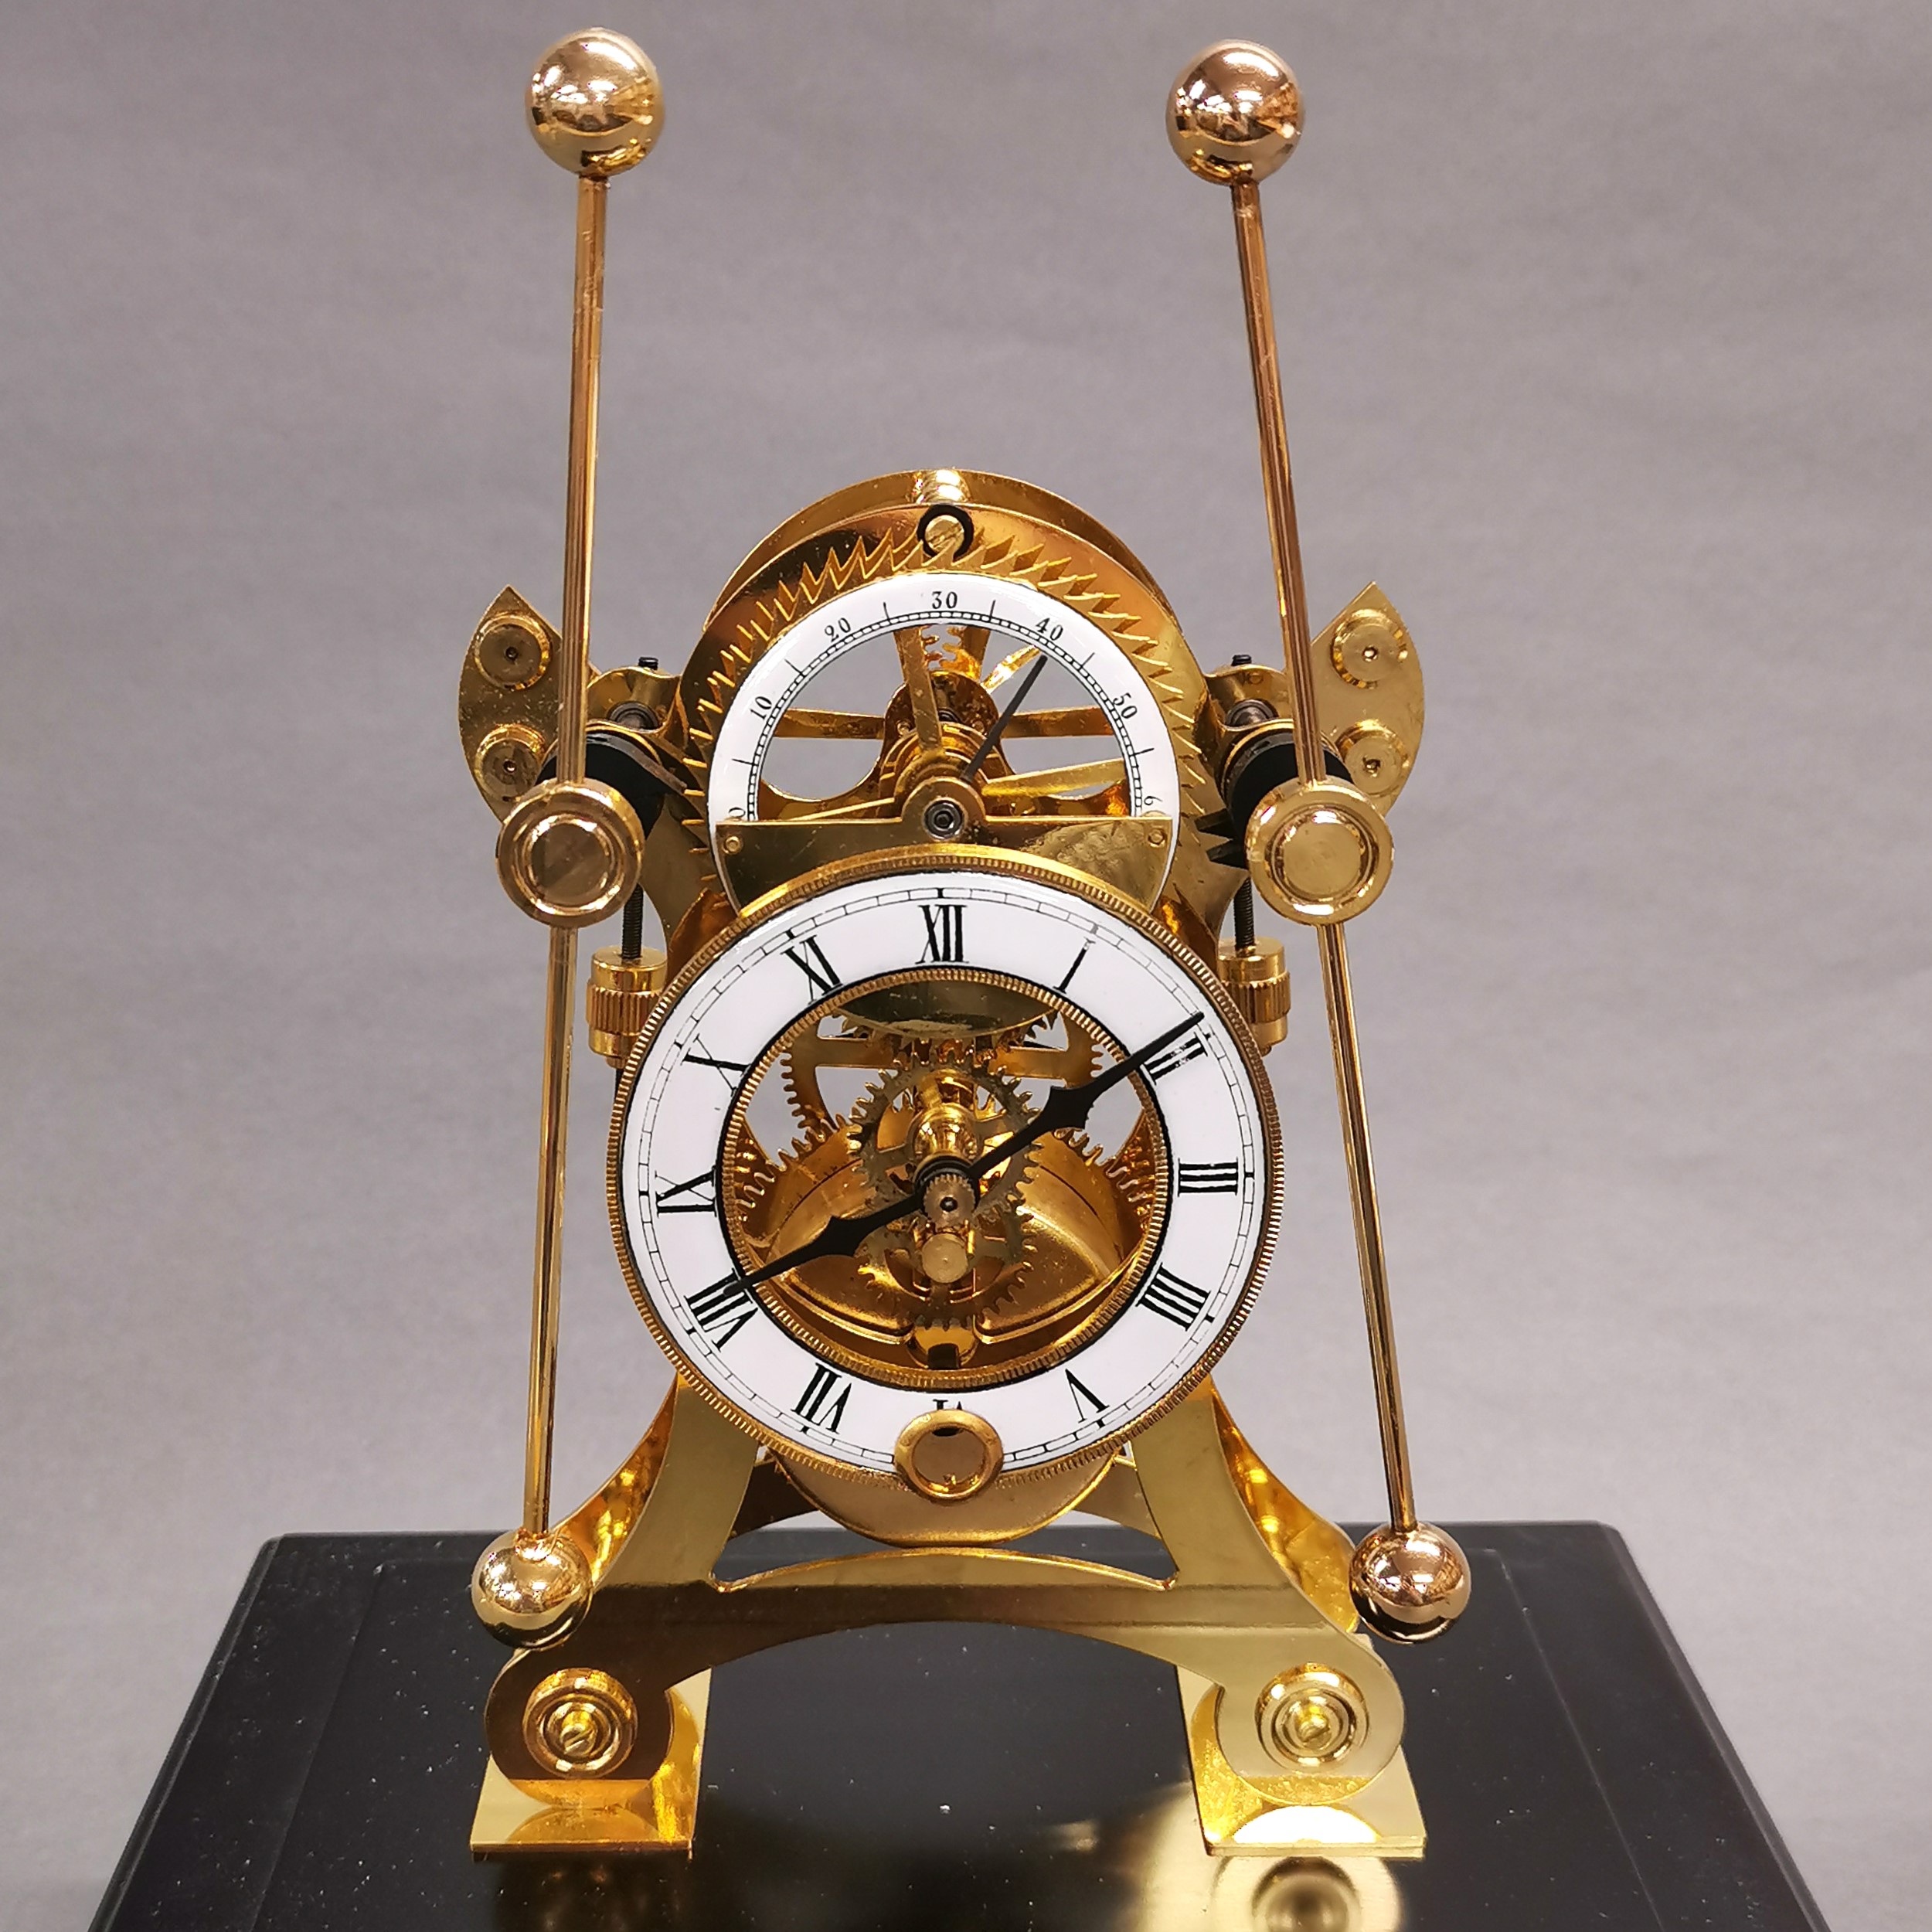 A brass and glass cased grasshopper clock. Case size 24 x 20 x 14cm. - Image 2 of 3